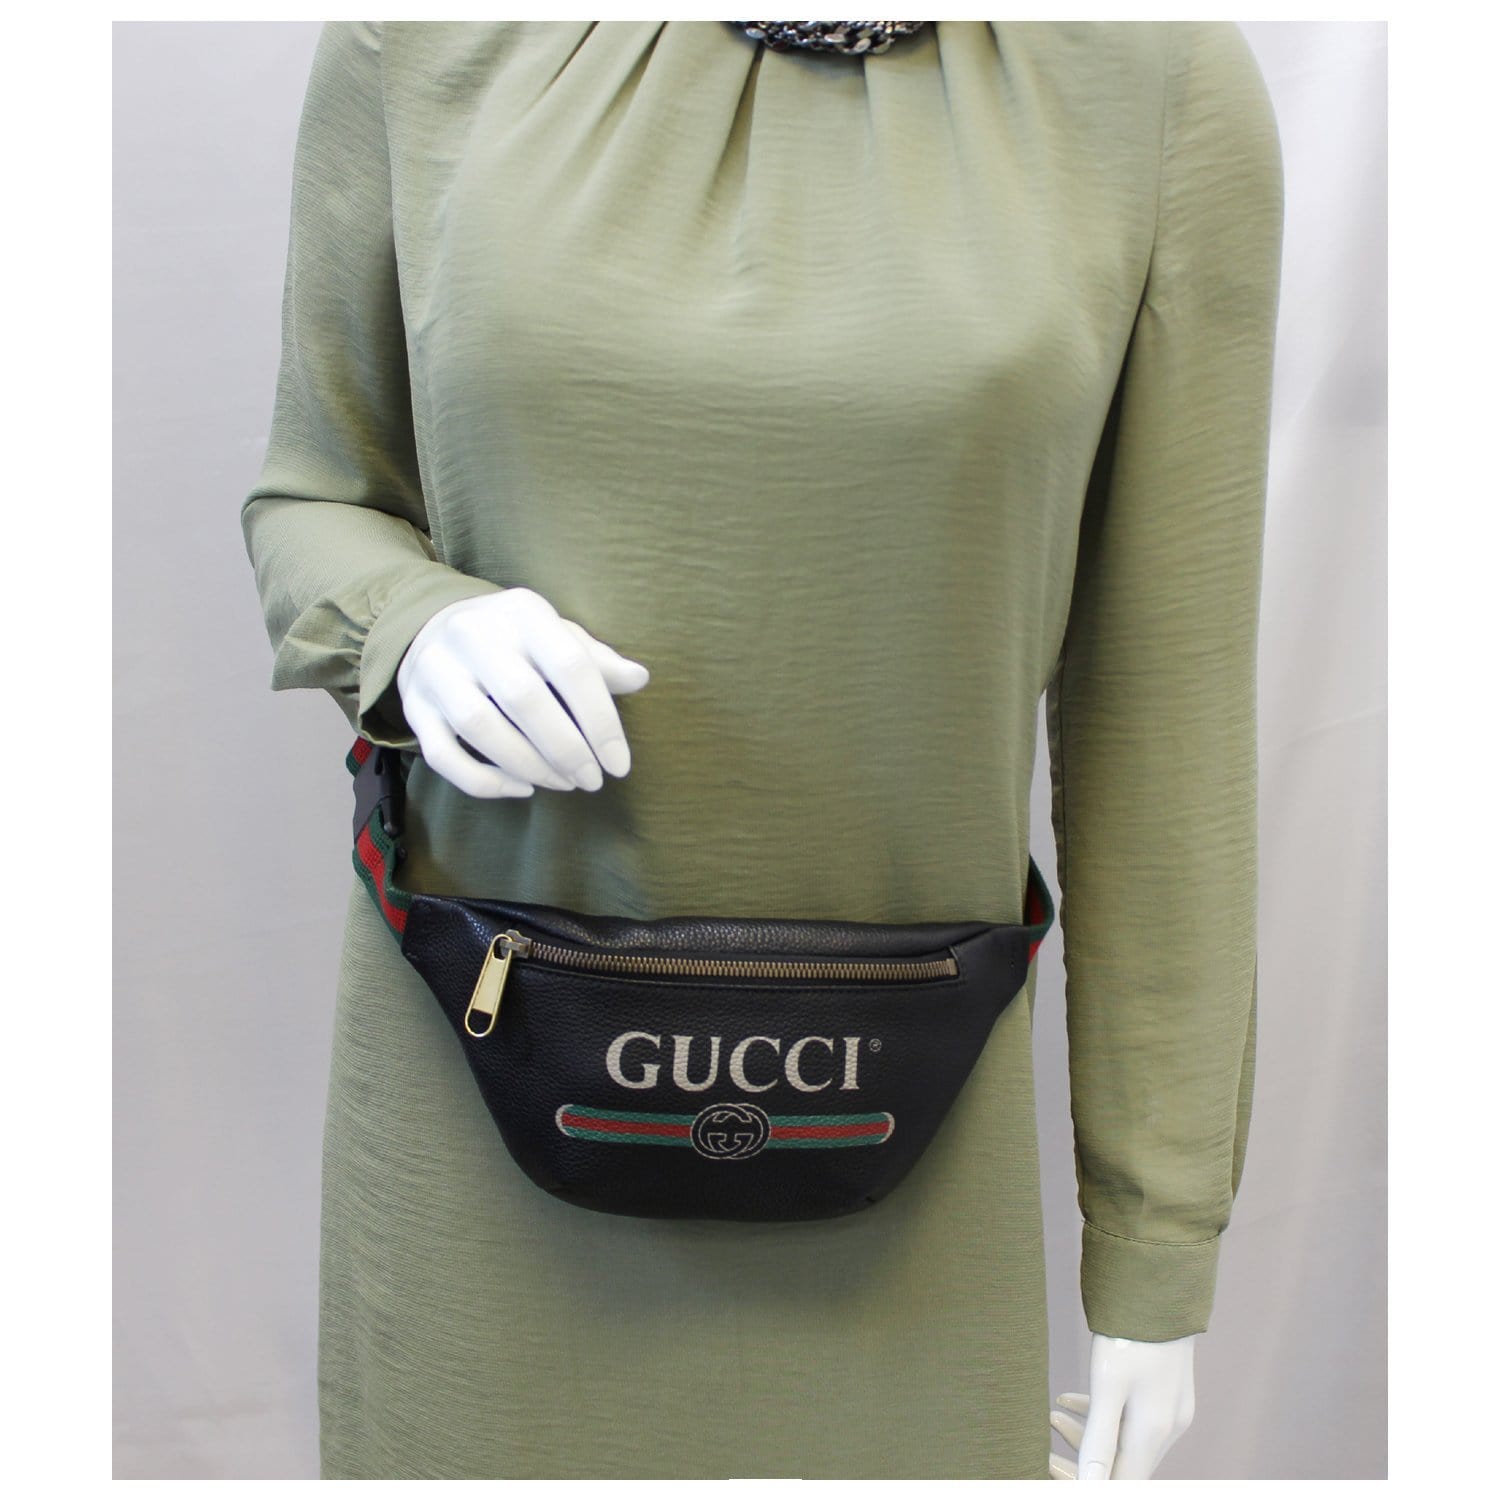 Excellent Condition GUCCI Belt Bag Fanny Pack Red Large Size